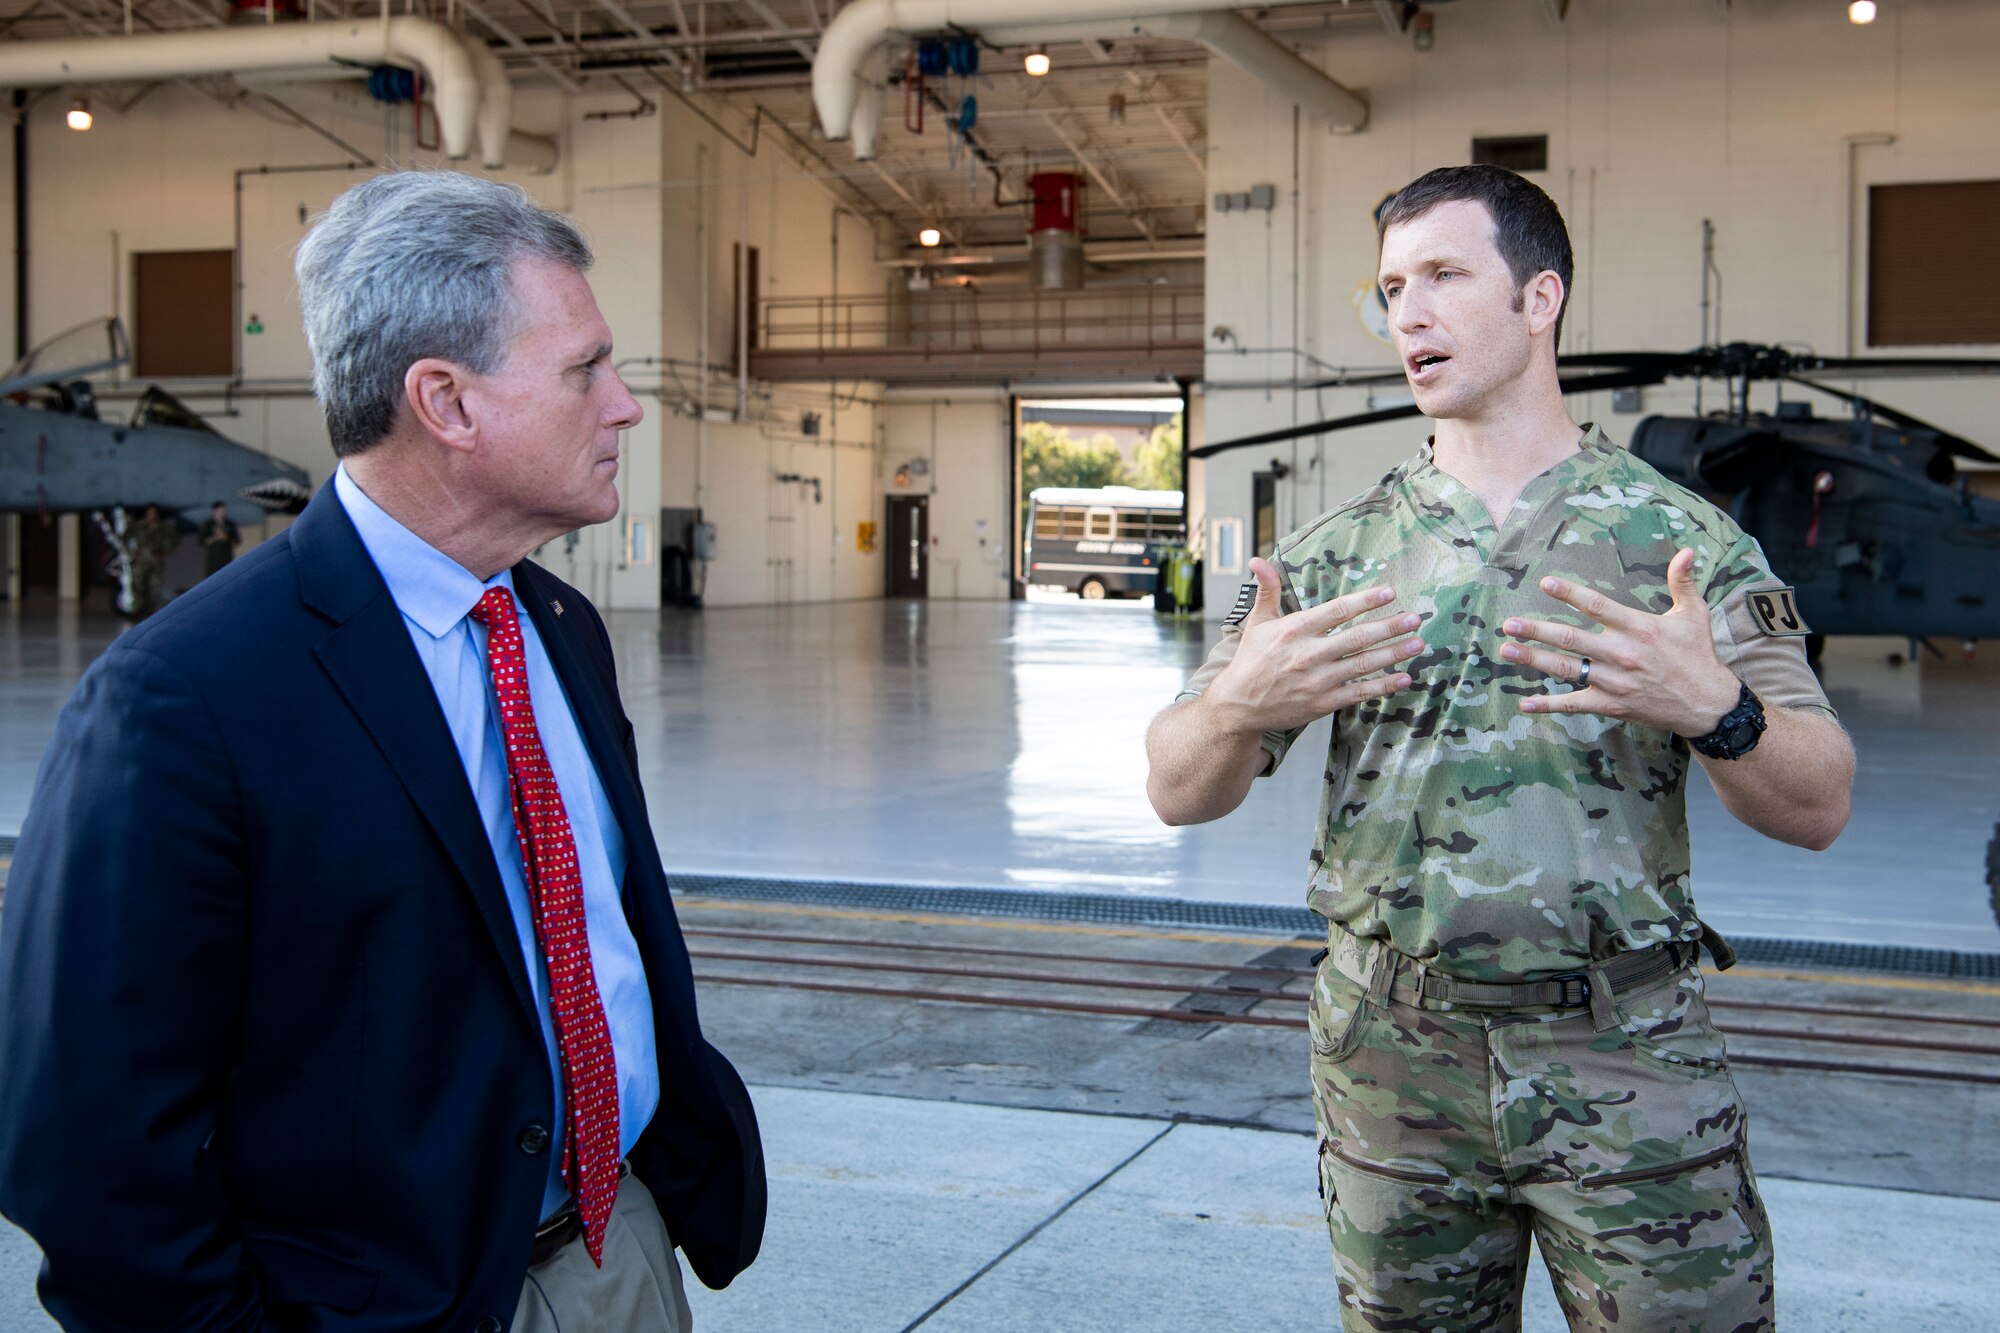 Master Sgt. Keith Aussant, 38th Rescue Squadron pararescueman, talks to U.S. Representative Buddy Carter, Georgia District 1, at Moody Air Force Base, Ga., Oct. 3, 2019. During his visit, Congressman Carter met Flying Tiger Airmen to learn about their contributions to the 23d Wing mission. (U.S. Air Force photo by Andrea Jenkins)